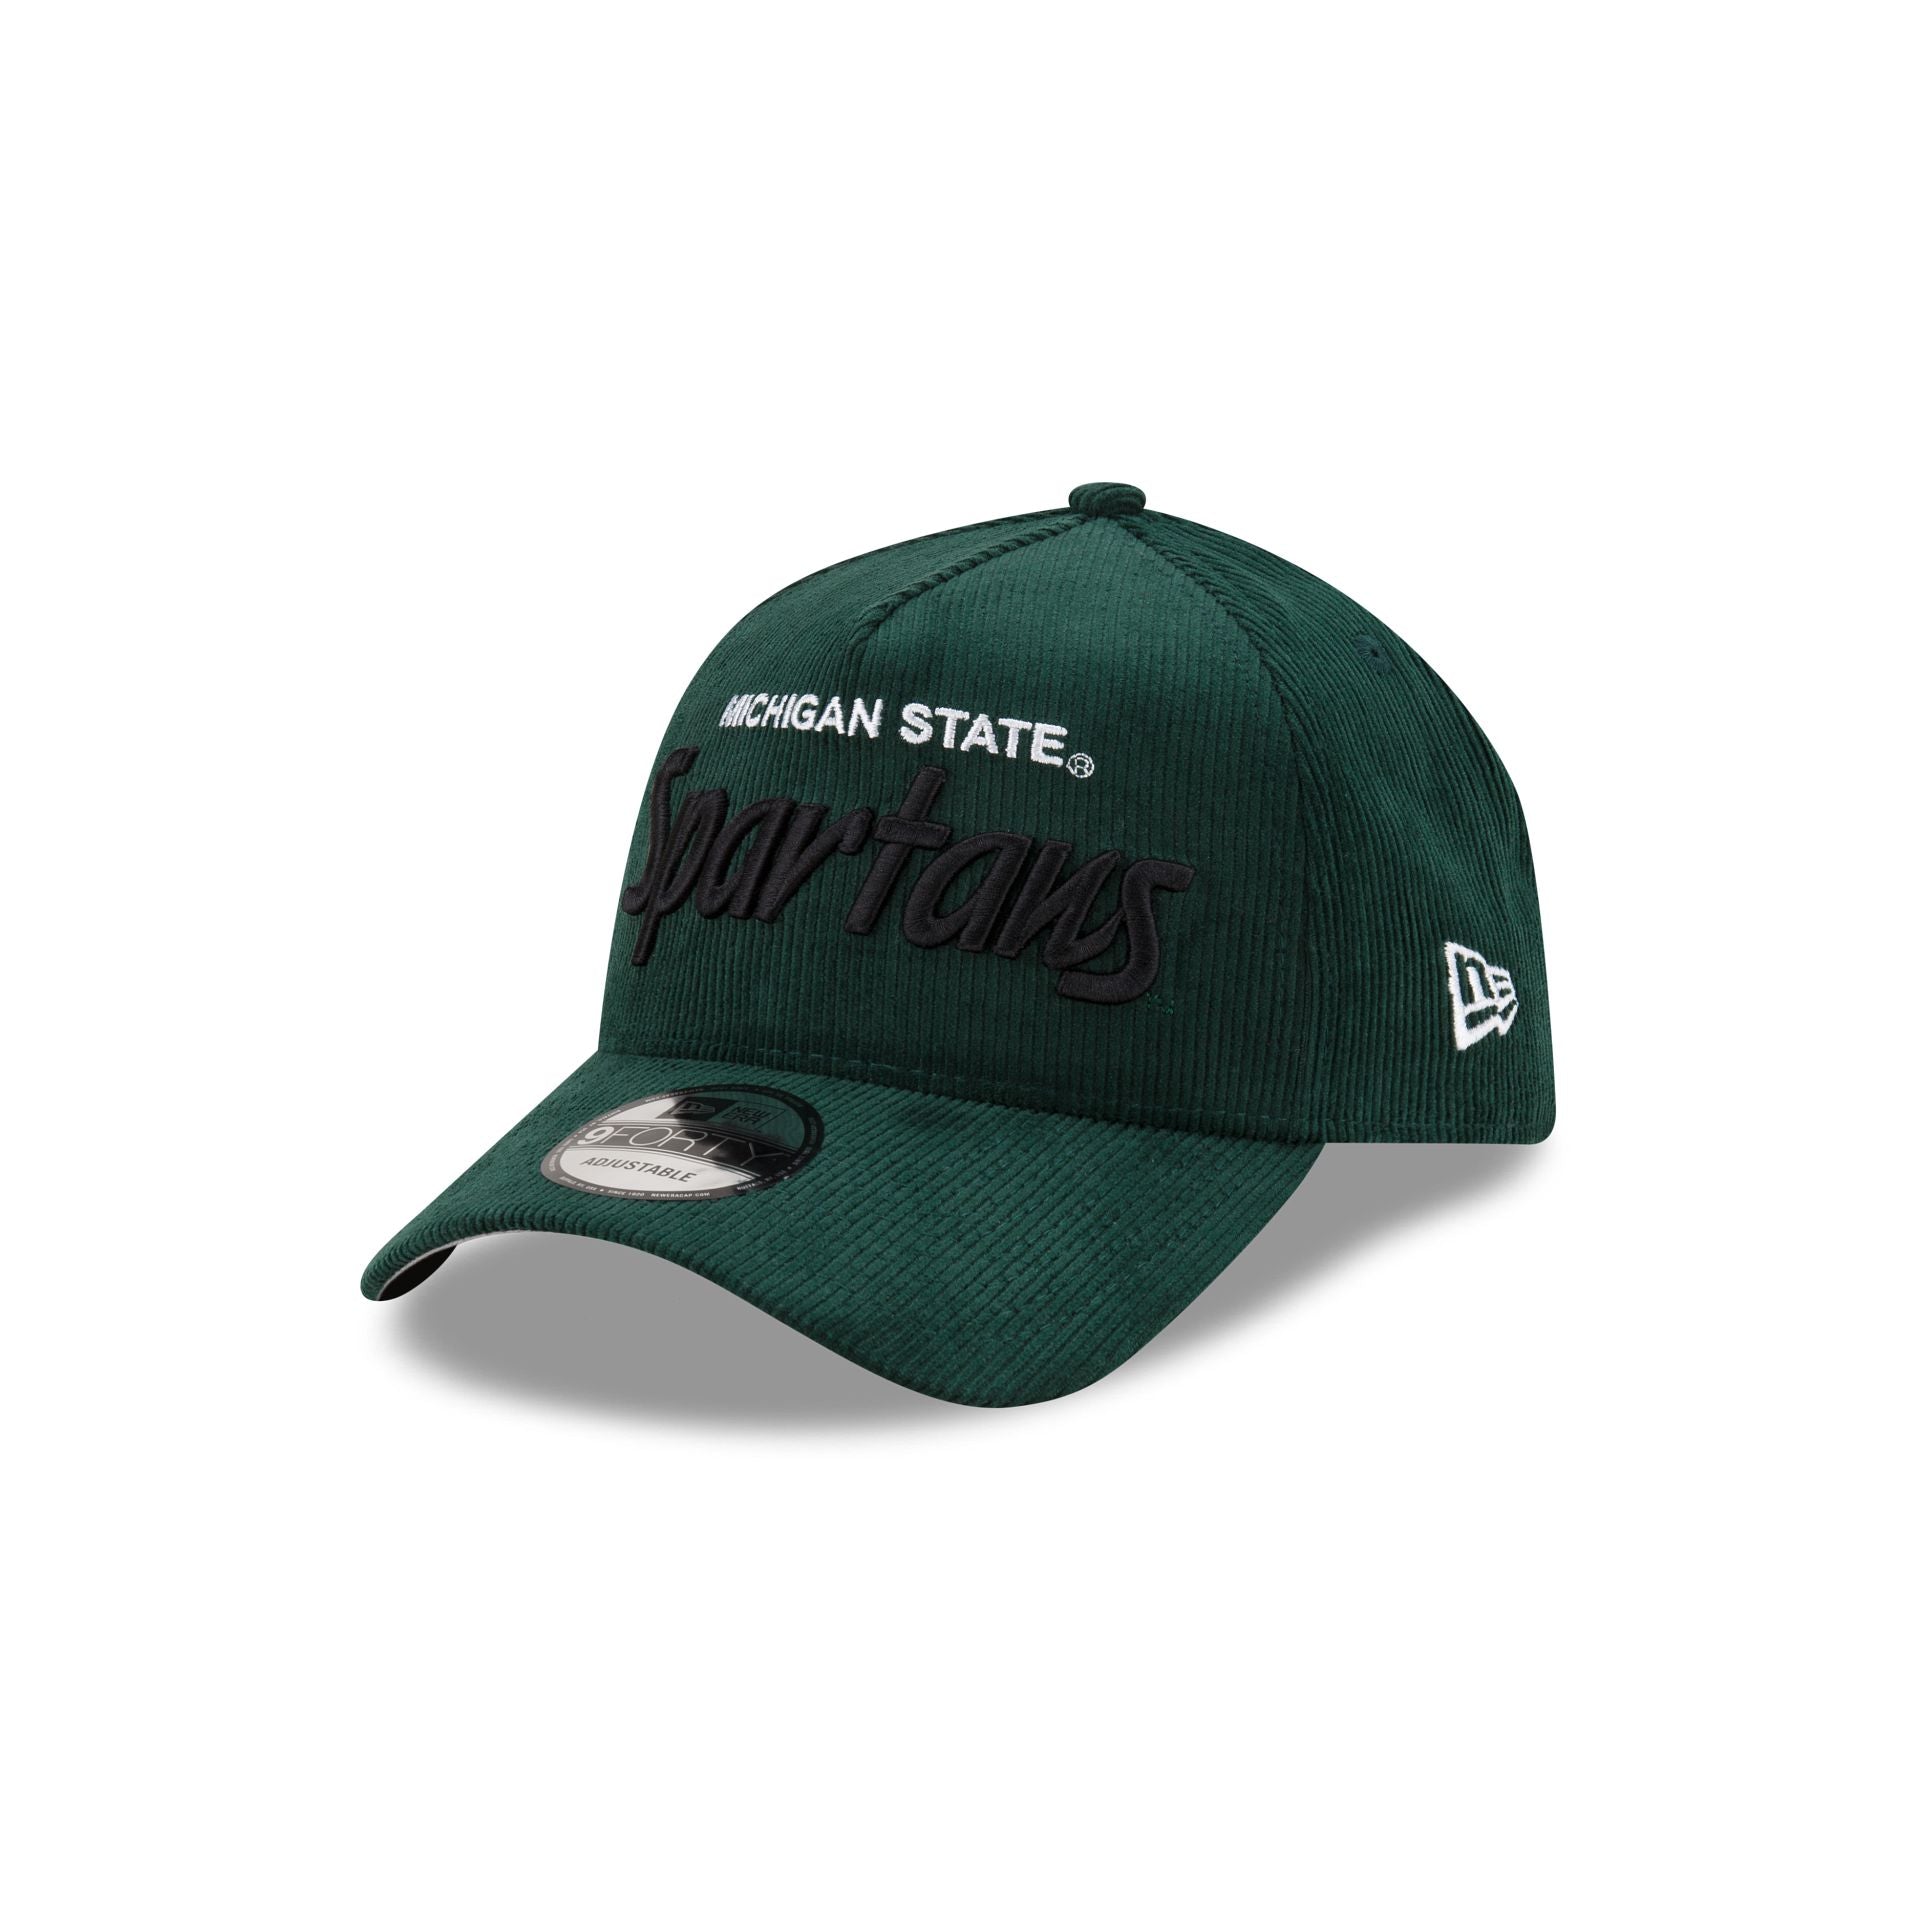 Michigan State Spartans Collegiate Corduroy 9FORTY A-Frame Snapback Ha ...